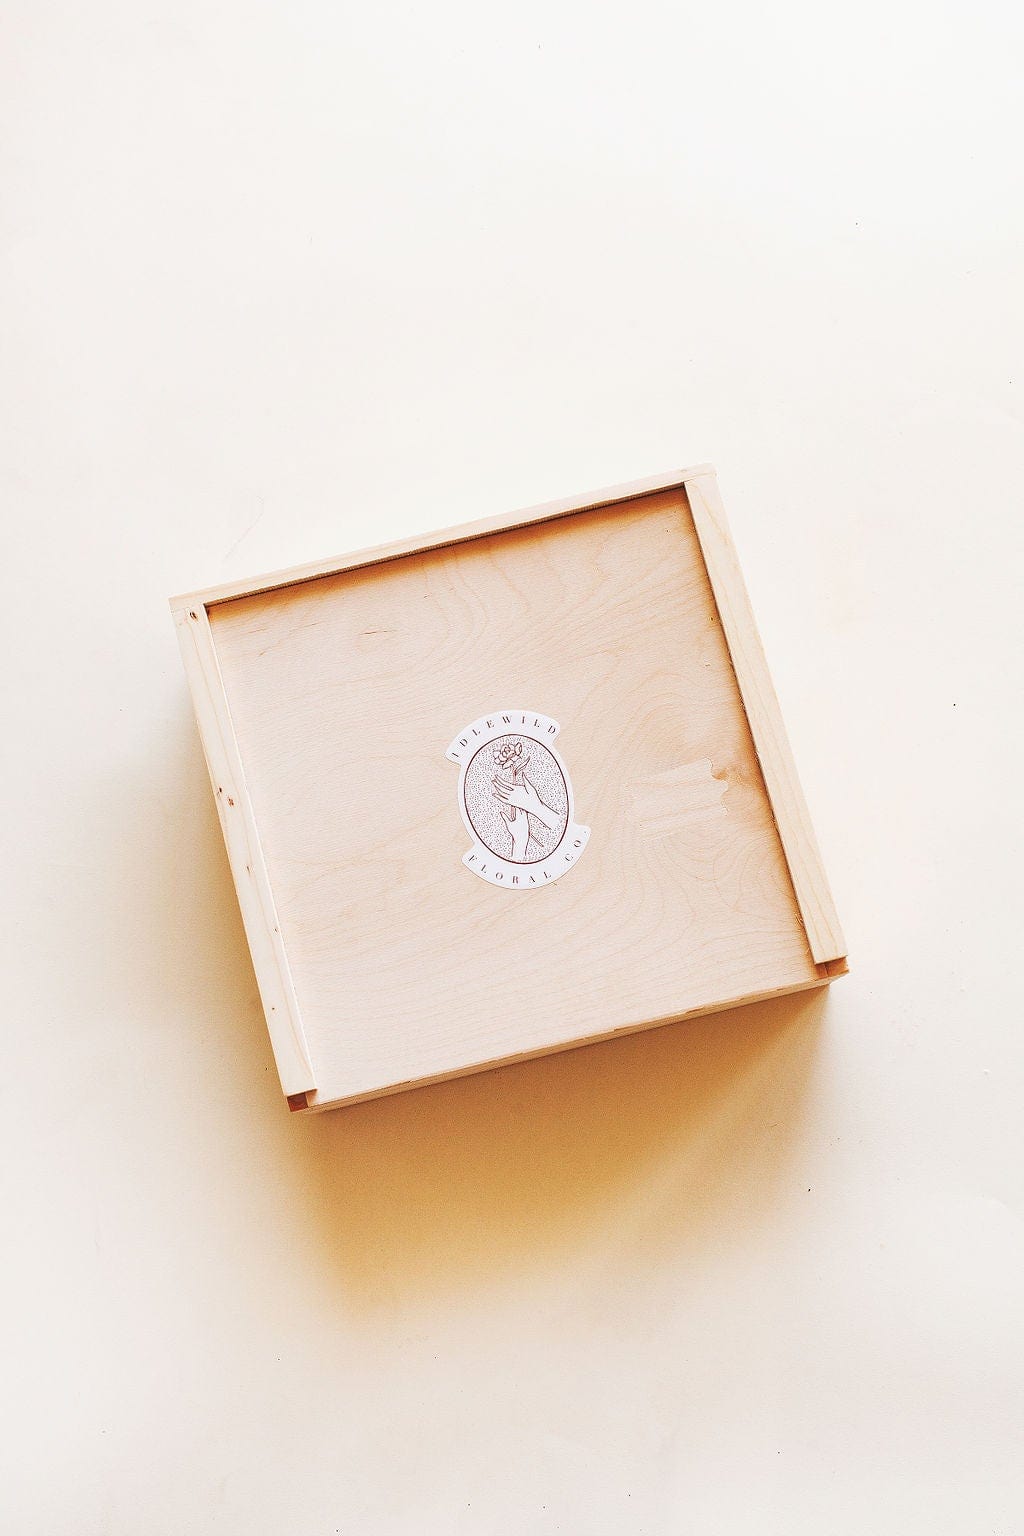 Idlewild Floral Co. Self Care Gift Box